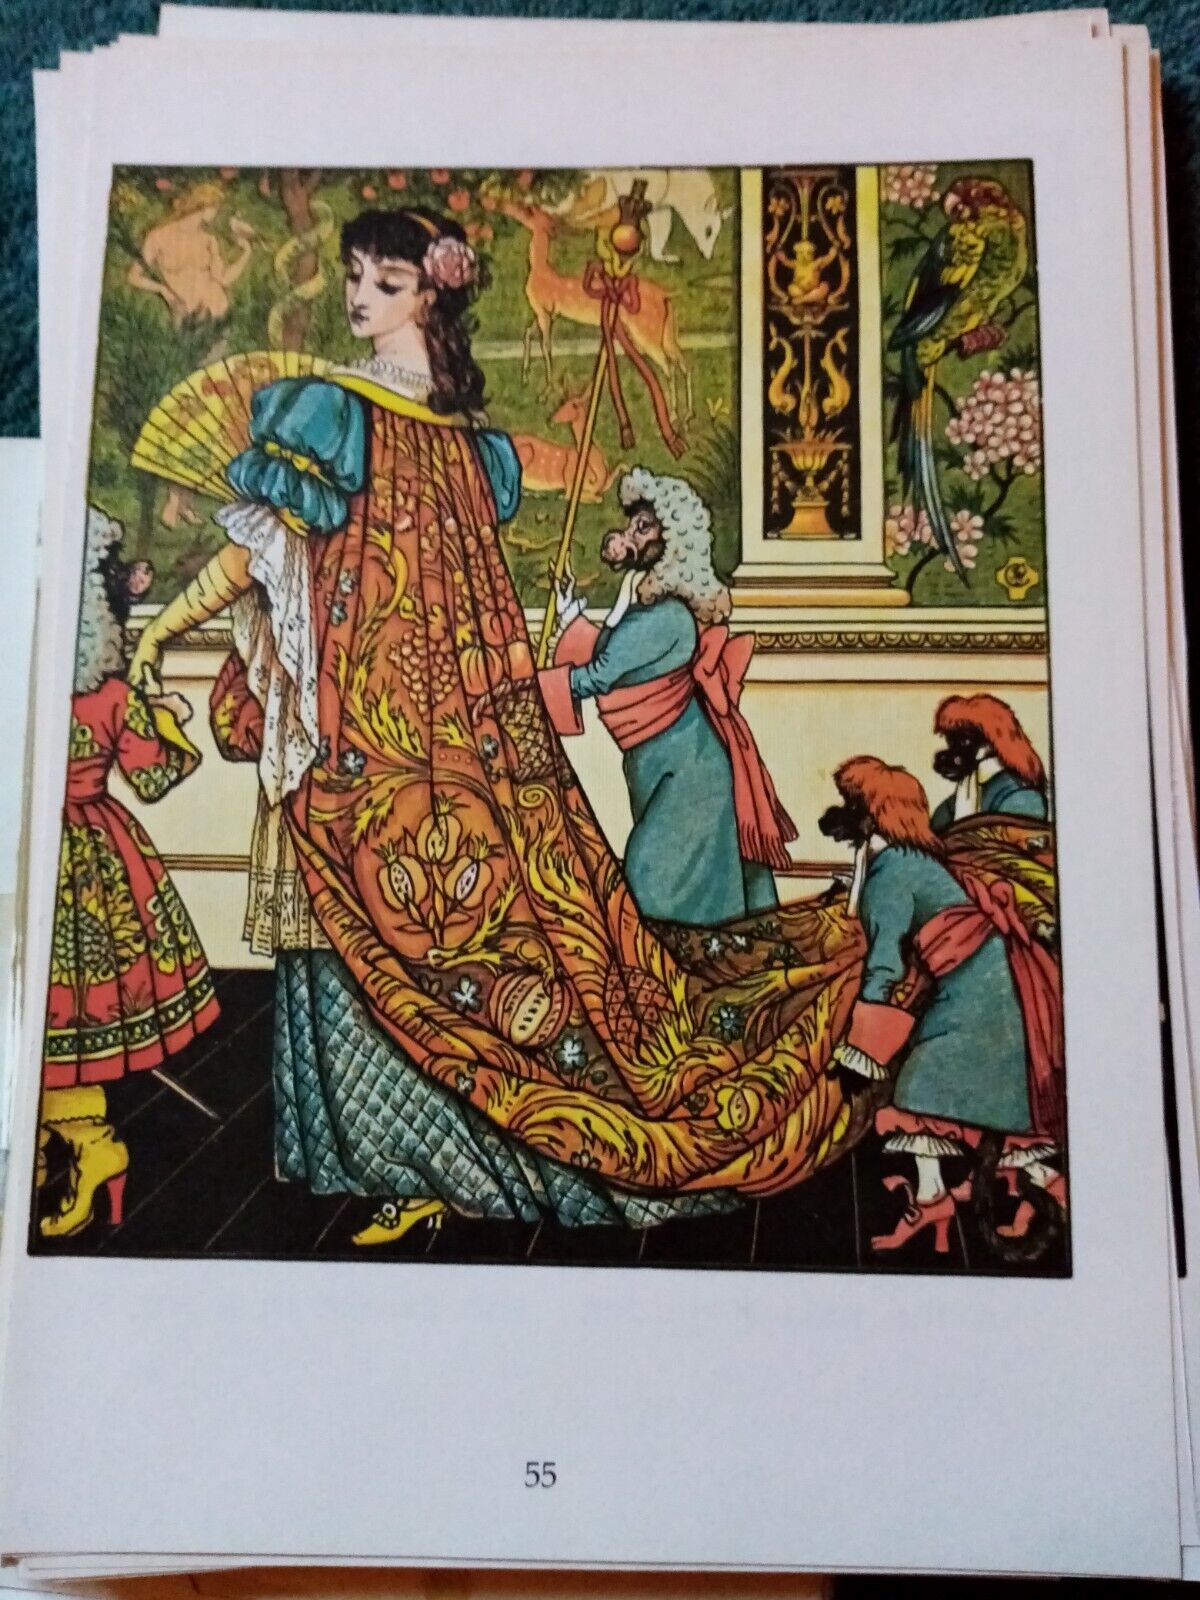 El75 Ephemera 1960s book picture beauty and the beast hs643